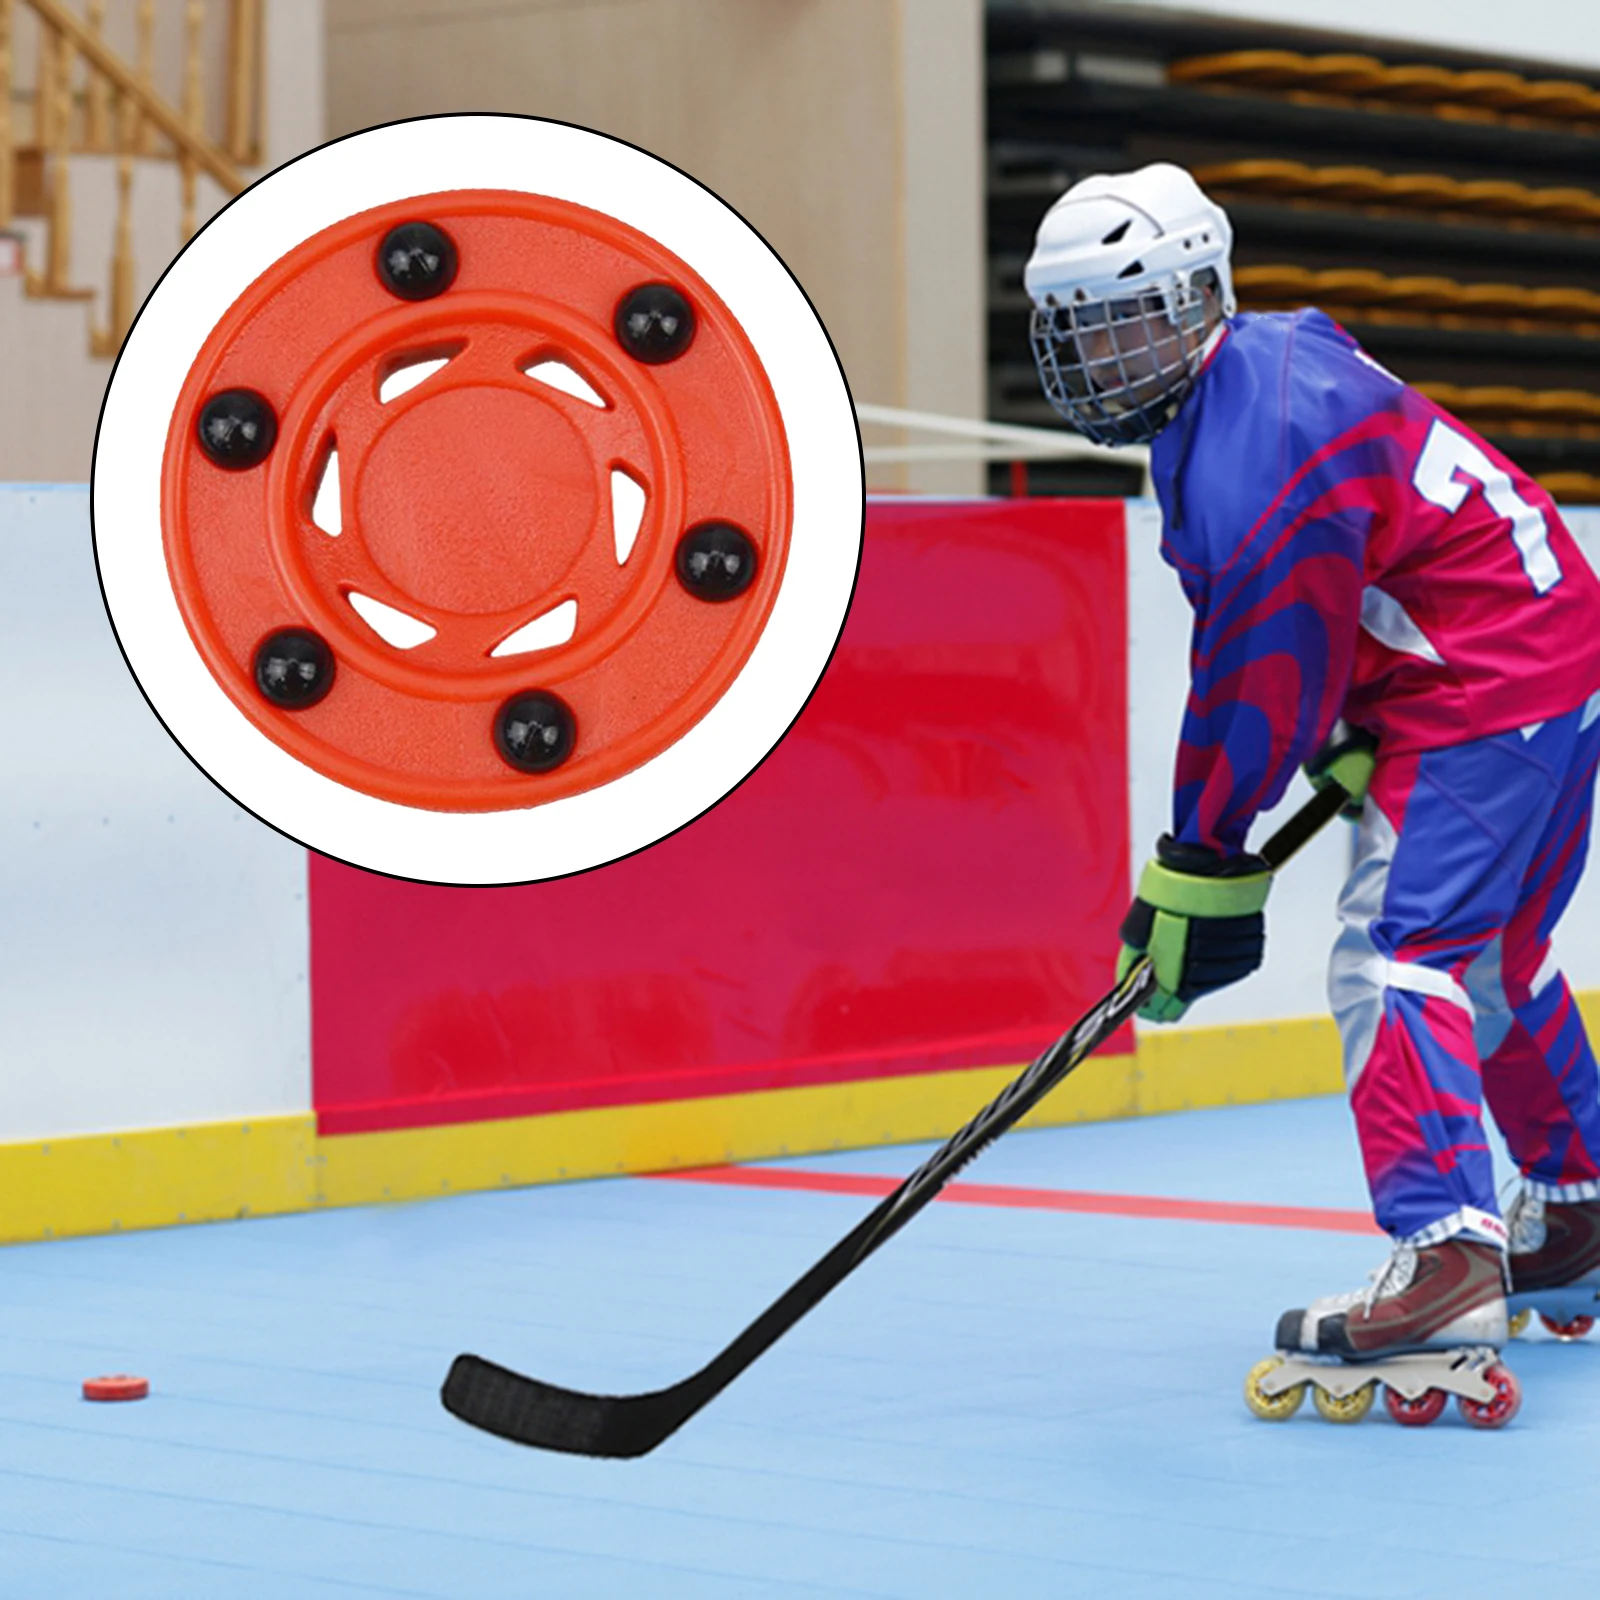 Sport Ice Hockey Pucks for Practicing and Classic Training, Diameter 3 inch